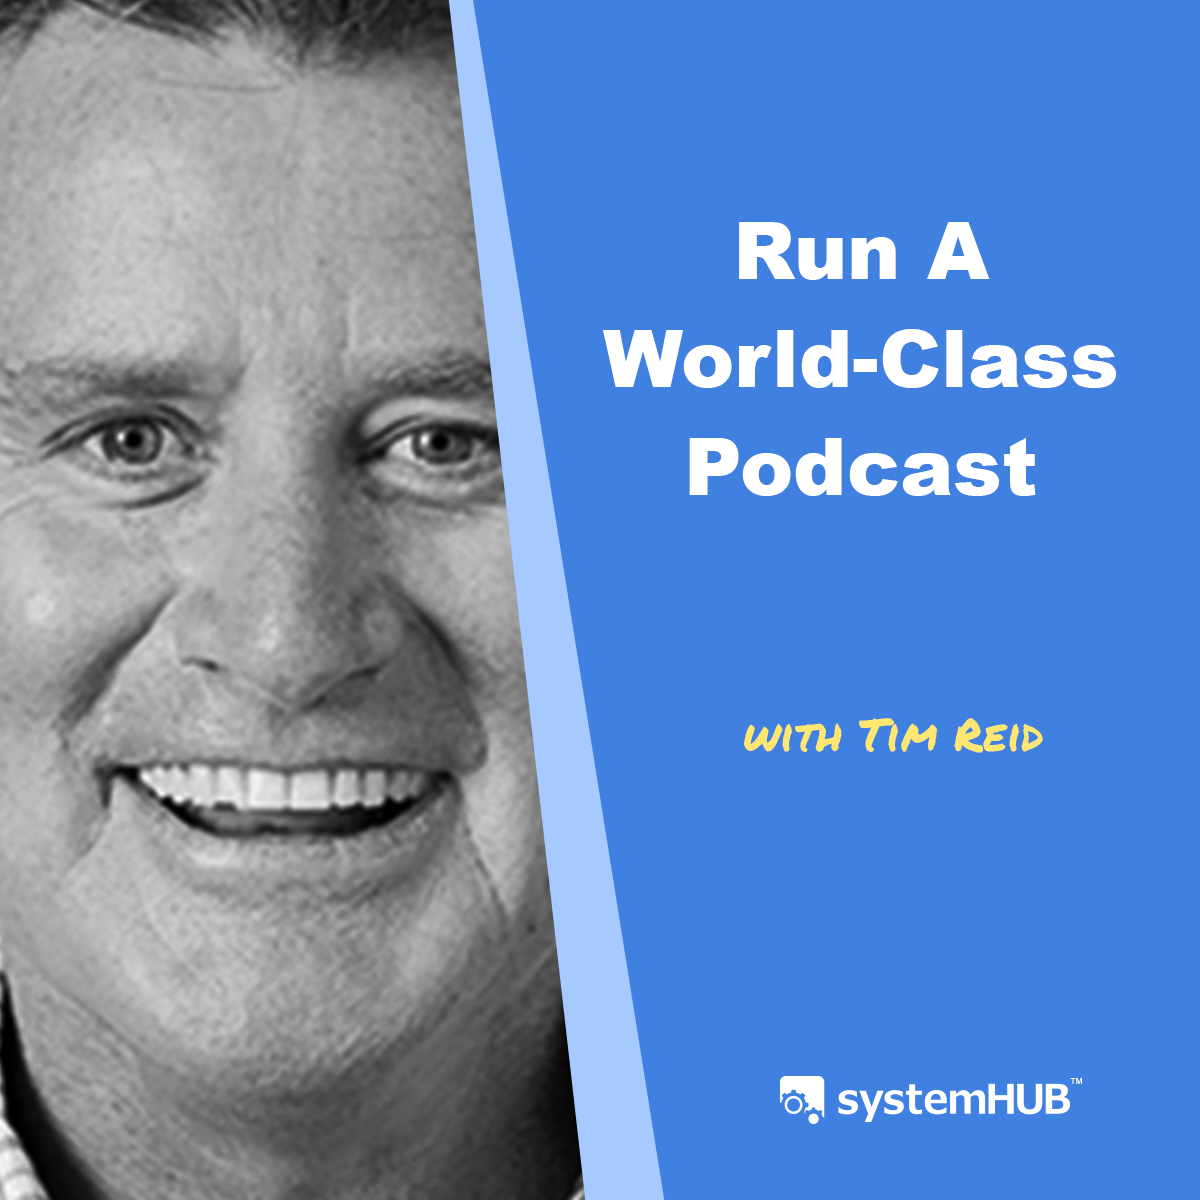 The Process for Running a World-Class Podcast with Tim Reid